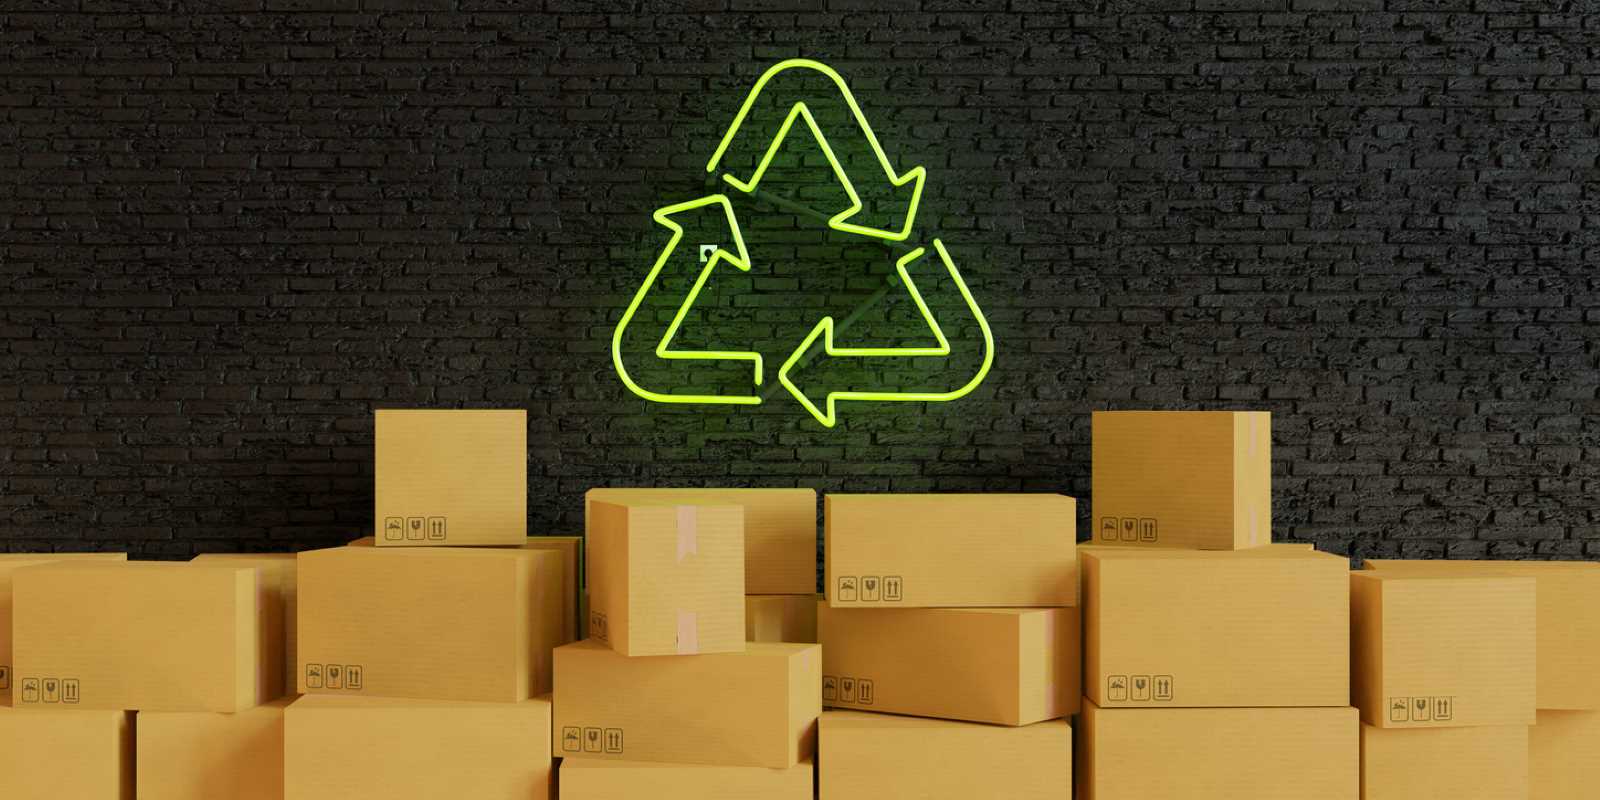 Cardboard boxes are stacked in front of a dark brick wall illuminated by a green neon recycling symbol lamp.